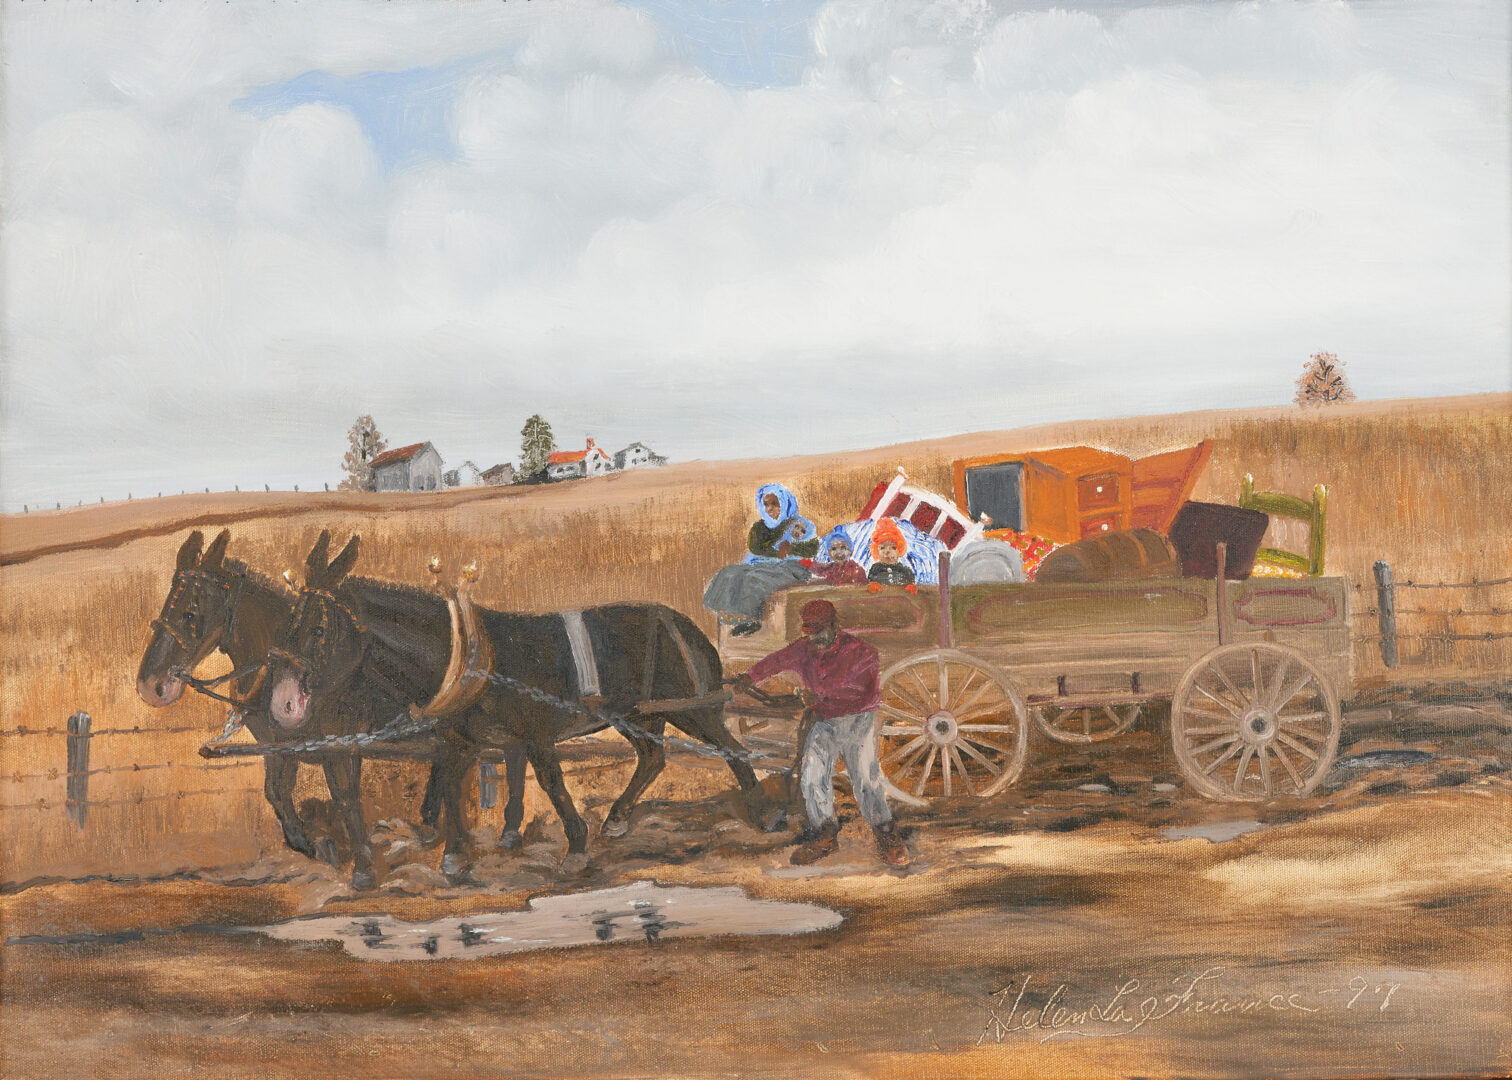 Lot 162: Helen LaFrance Oil Painting, "Moving Day"